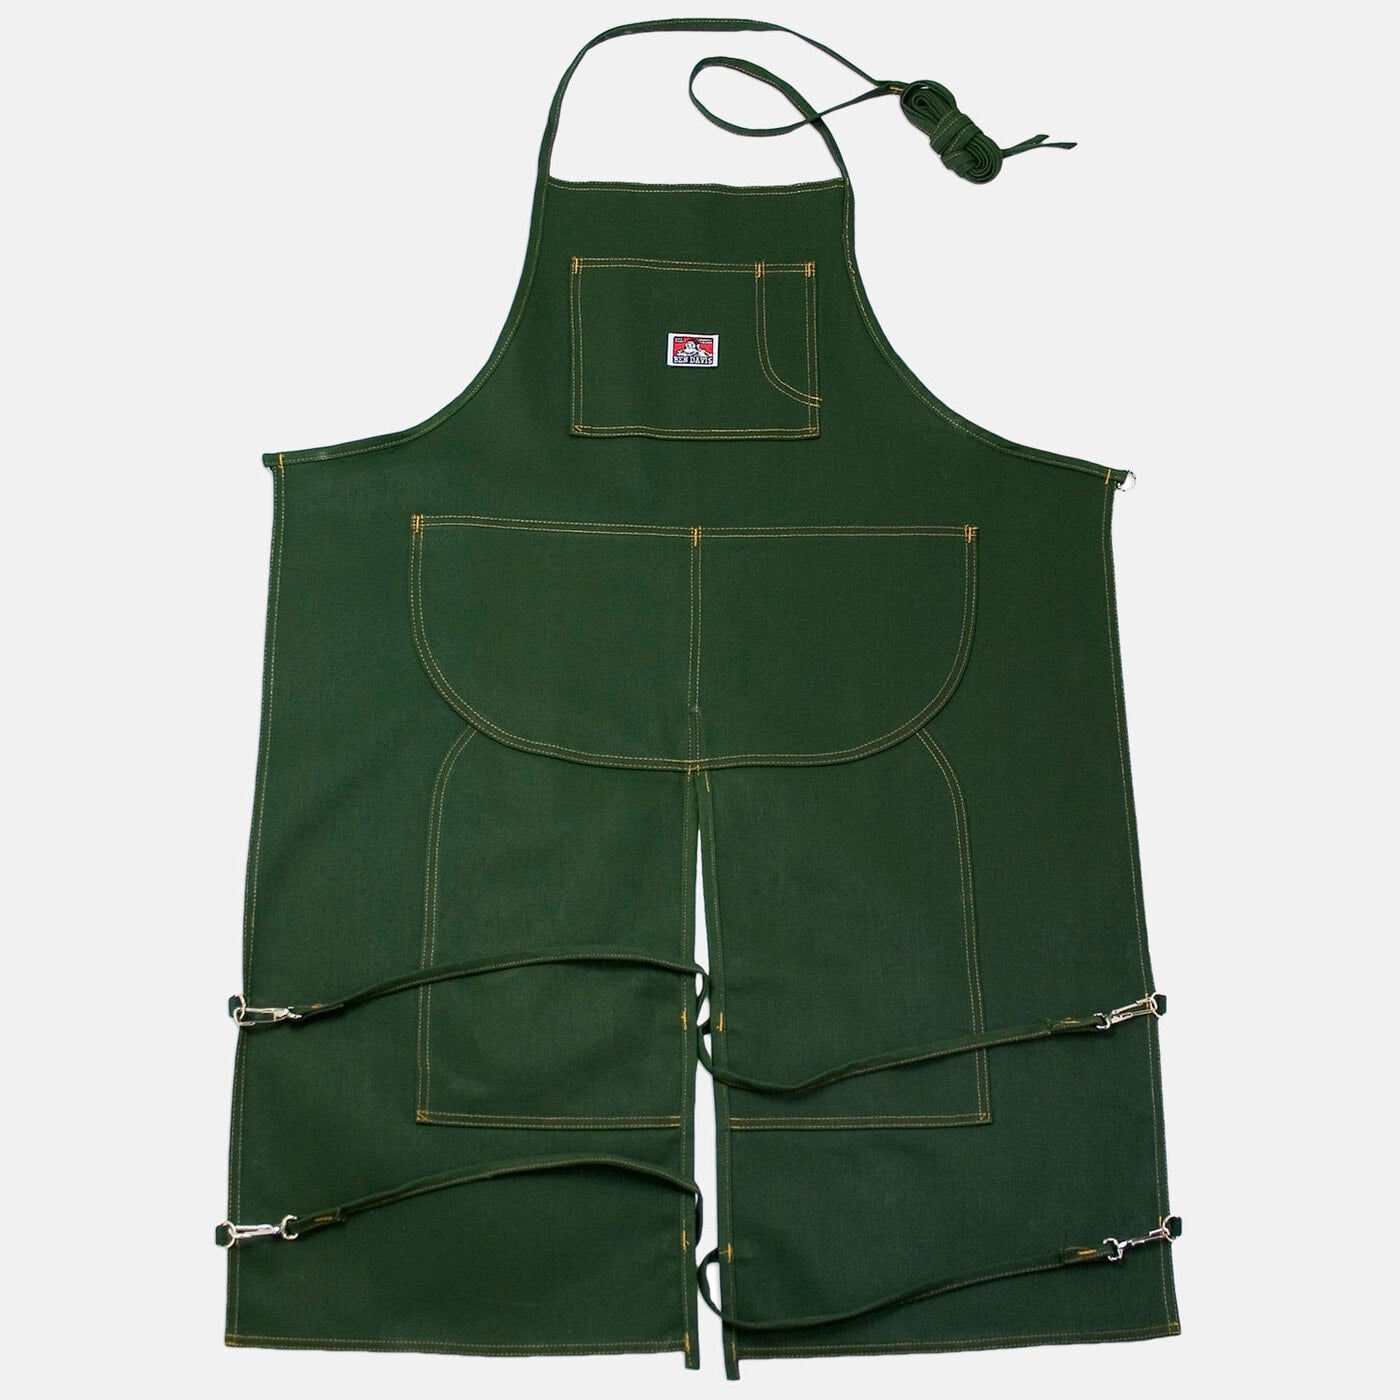 Worker's Utility Olive Teamster's Apron - One Size - basicsclothing